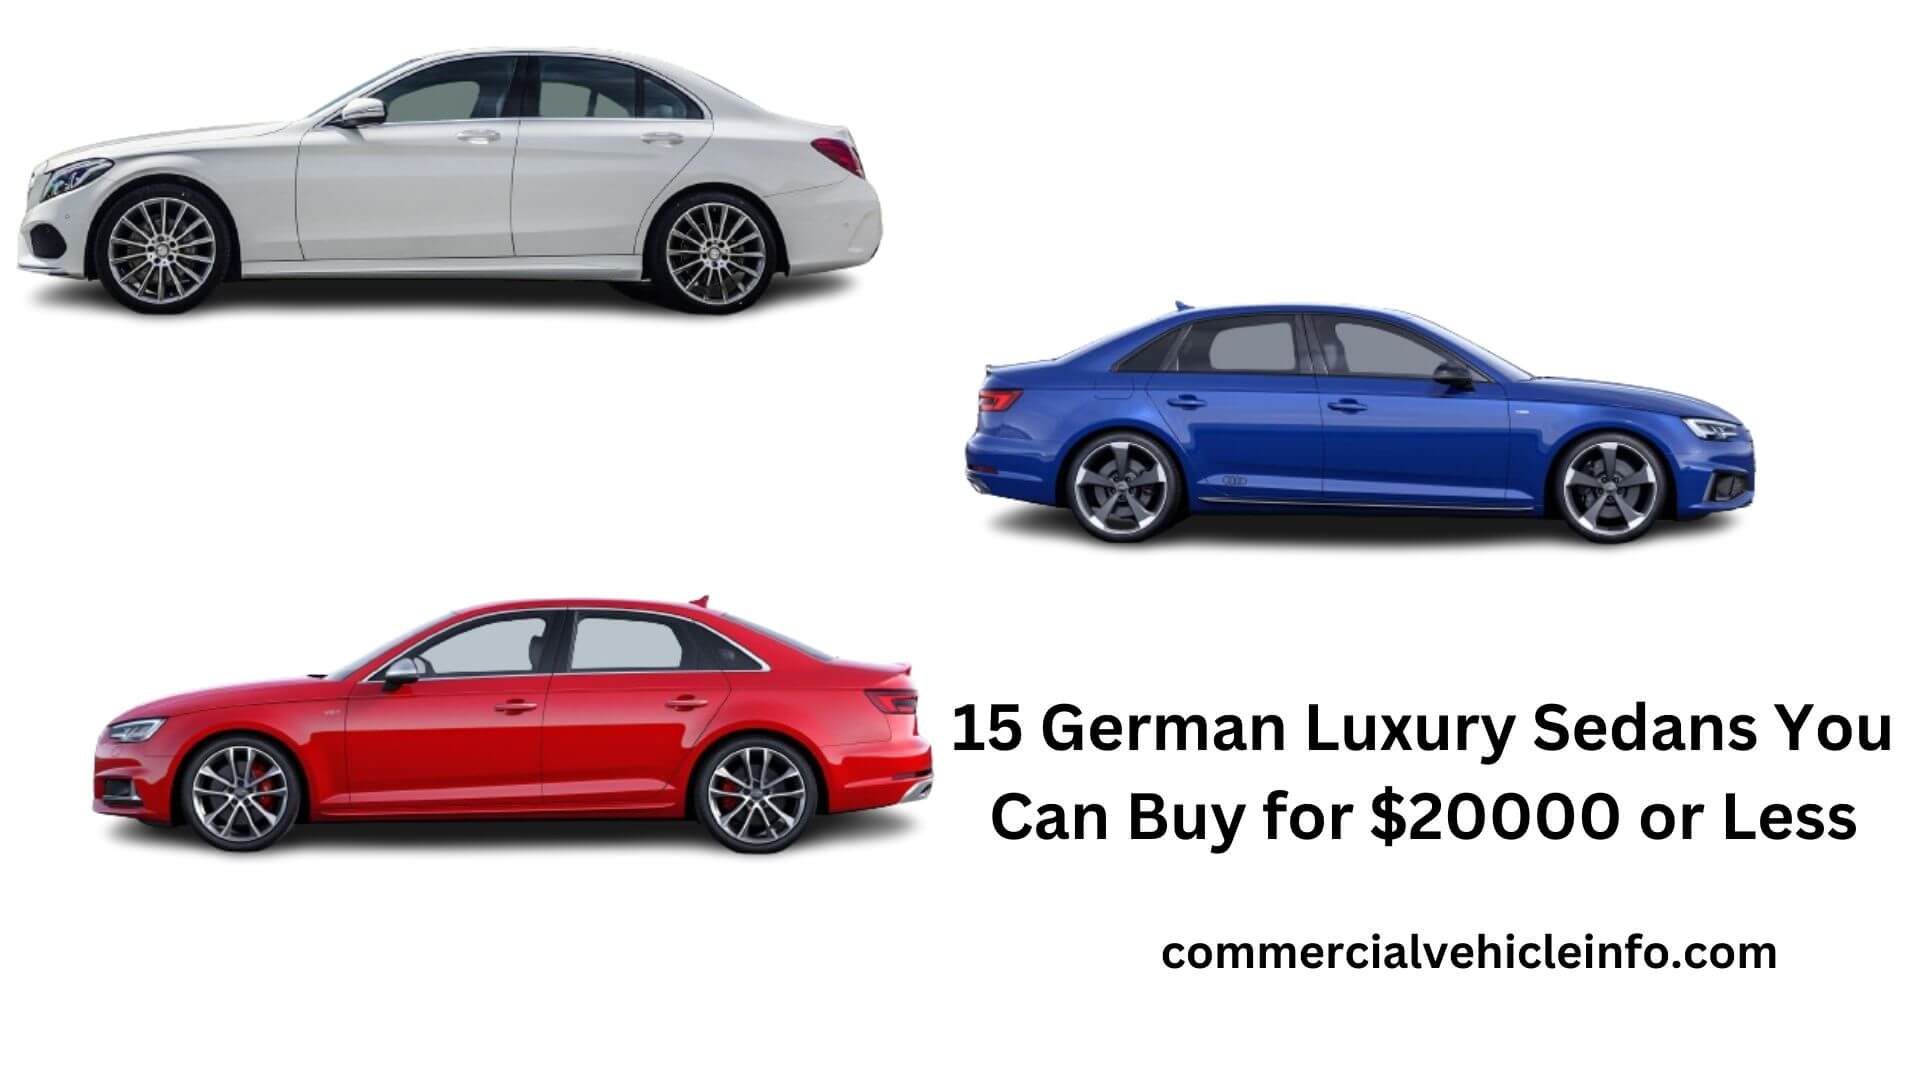 15-German-Luxury-Sedans-You-Can-Buy-for-20000-or-Less